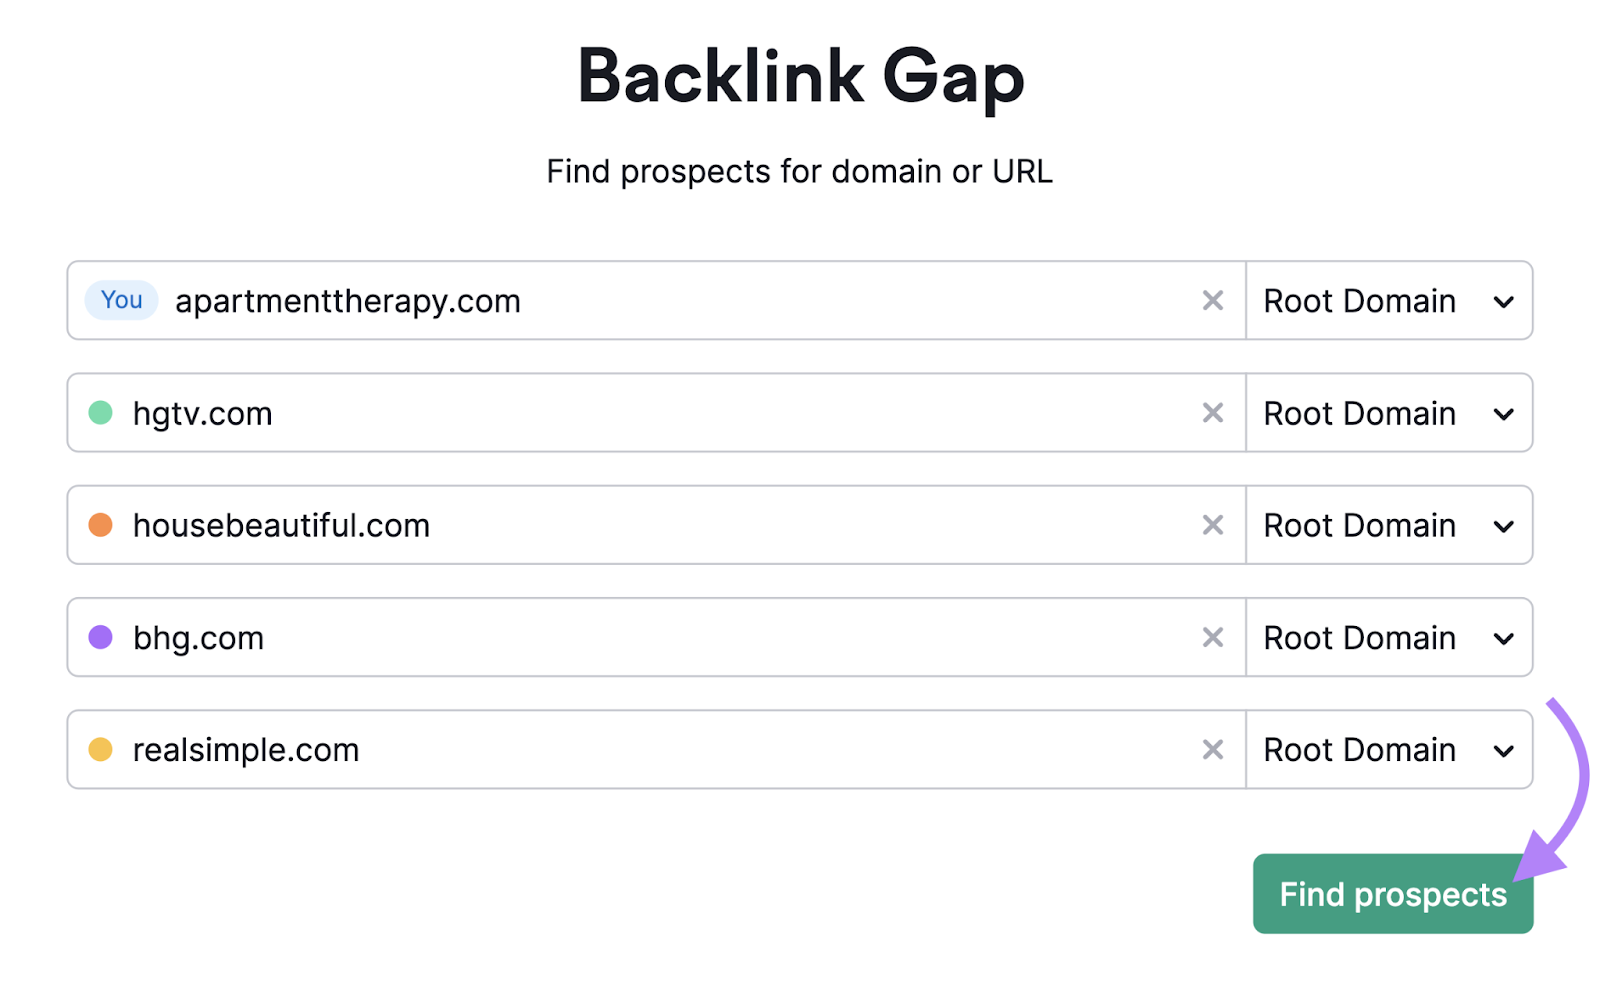 Enter yours and competitors’ domains to Backlink Gap tool